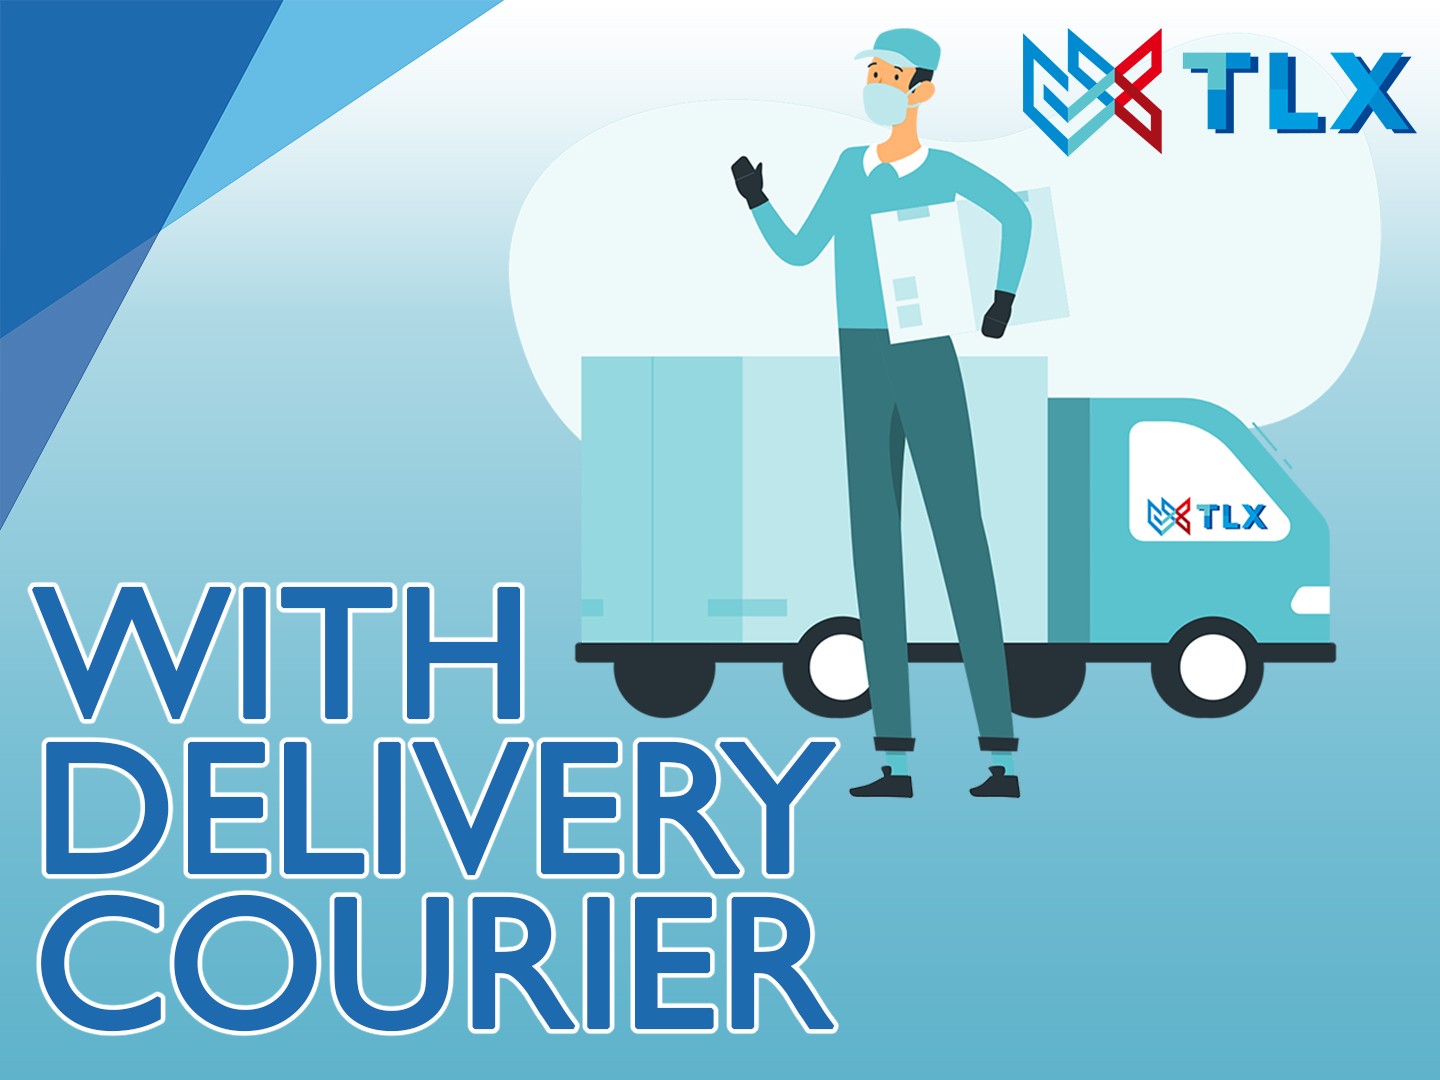 PENGERTIAN WITH DELIVERY COURIER